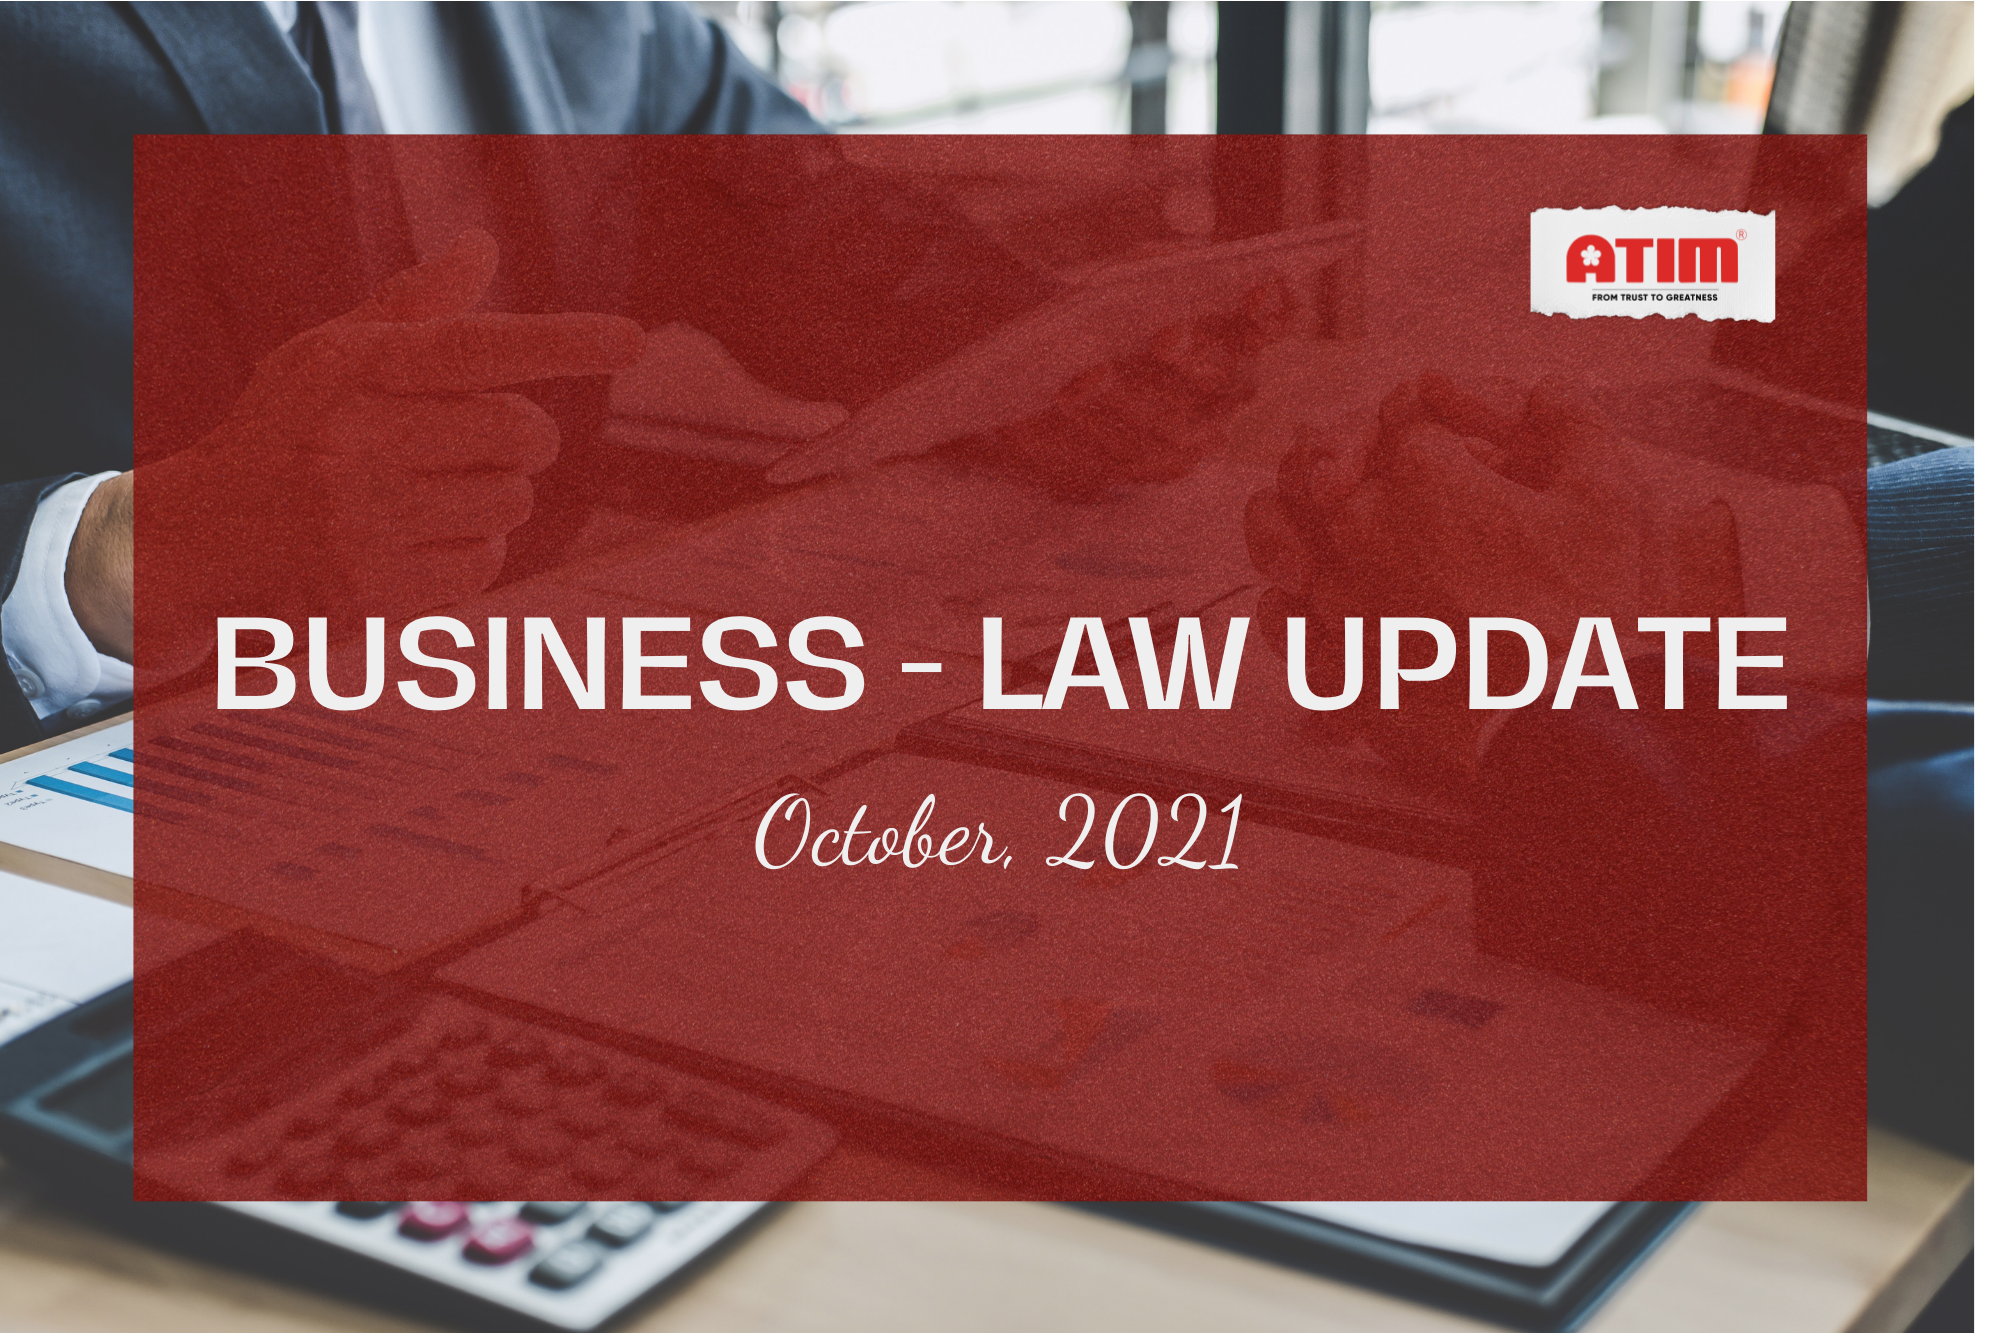 BUSINESS LAW UPDATE - OCTOBER 2021